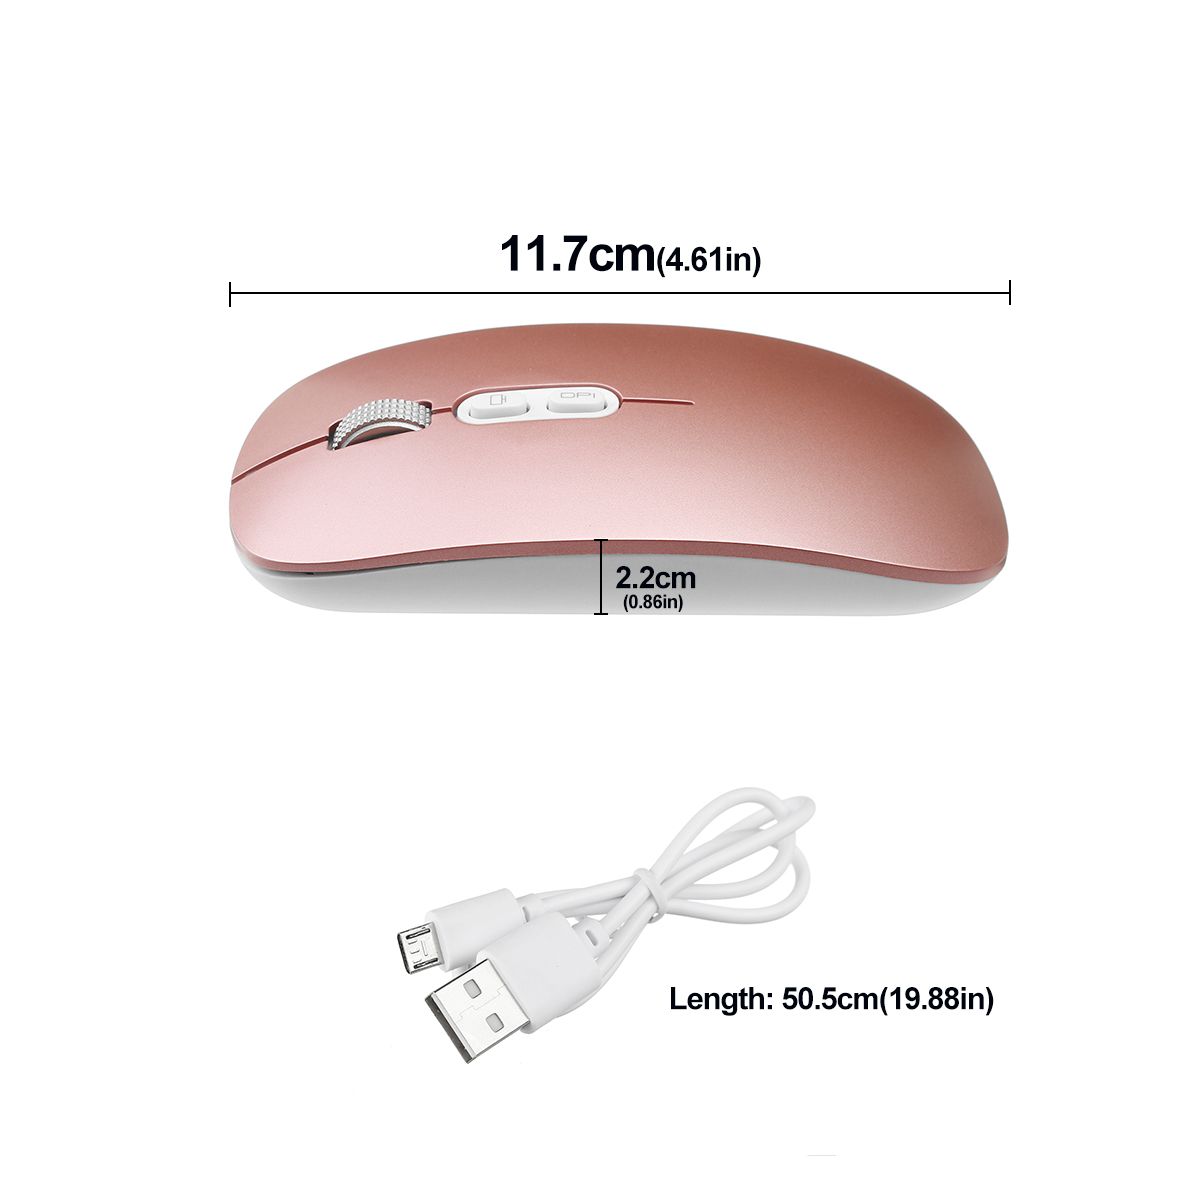 24-GHZ-80012001600-DPI-Wireless-USB-Charging-Ultra-thin-Office-Mouse-for-PC-Laptop-1575728